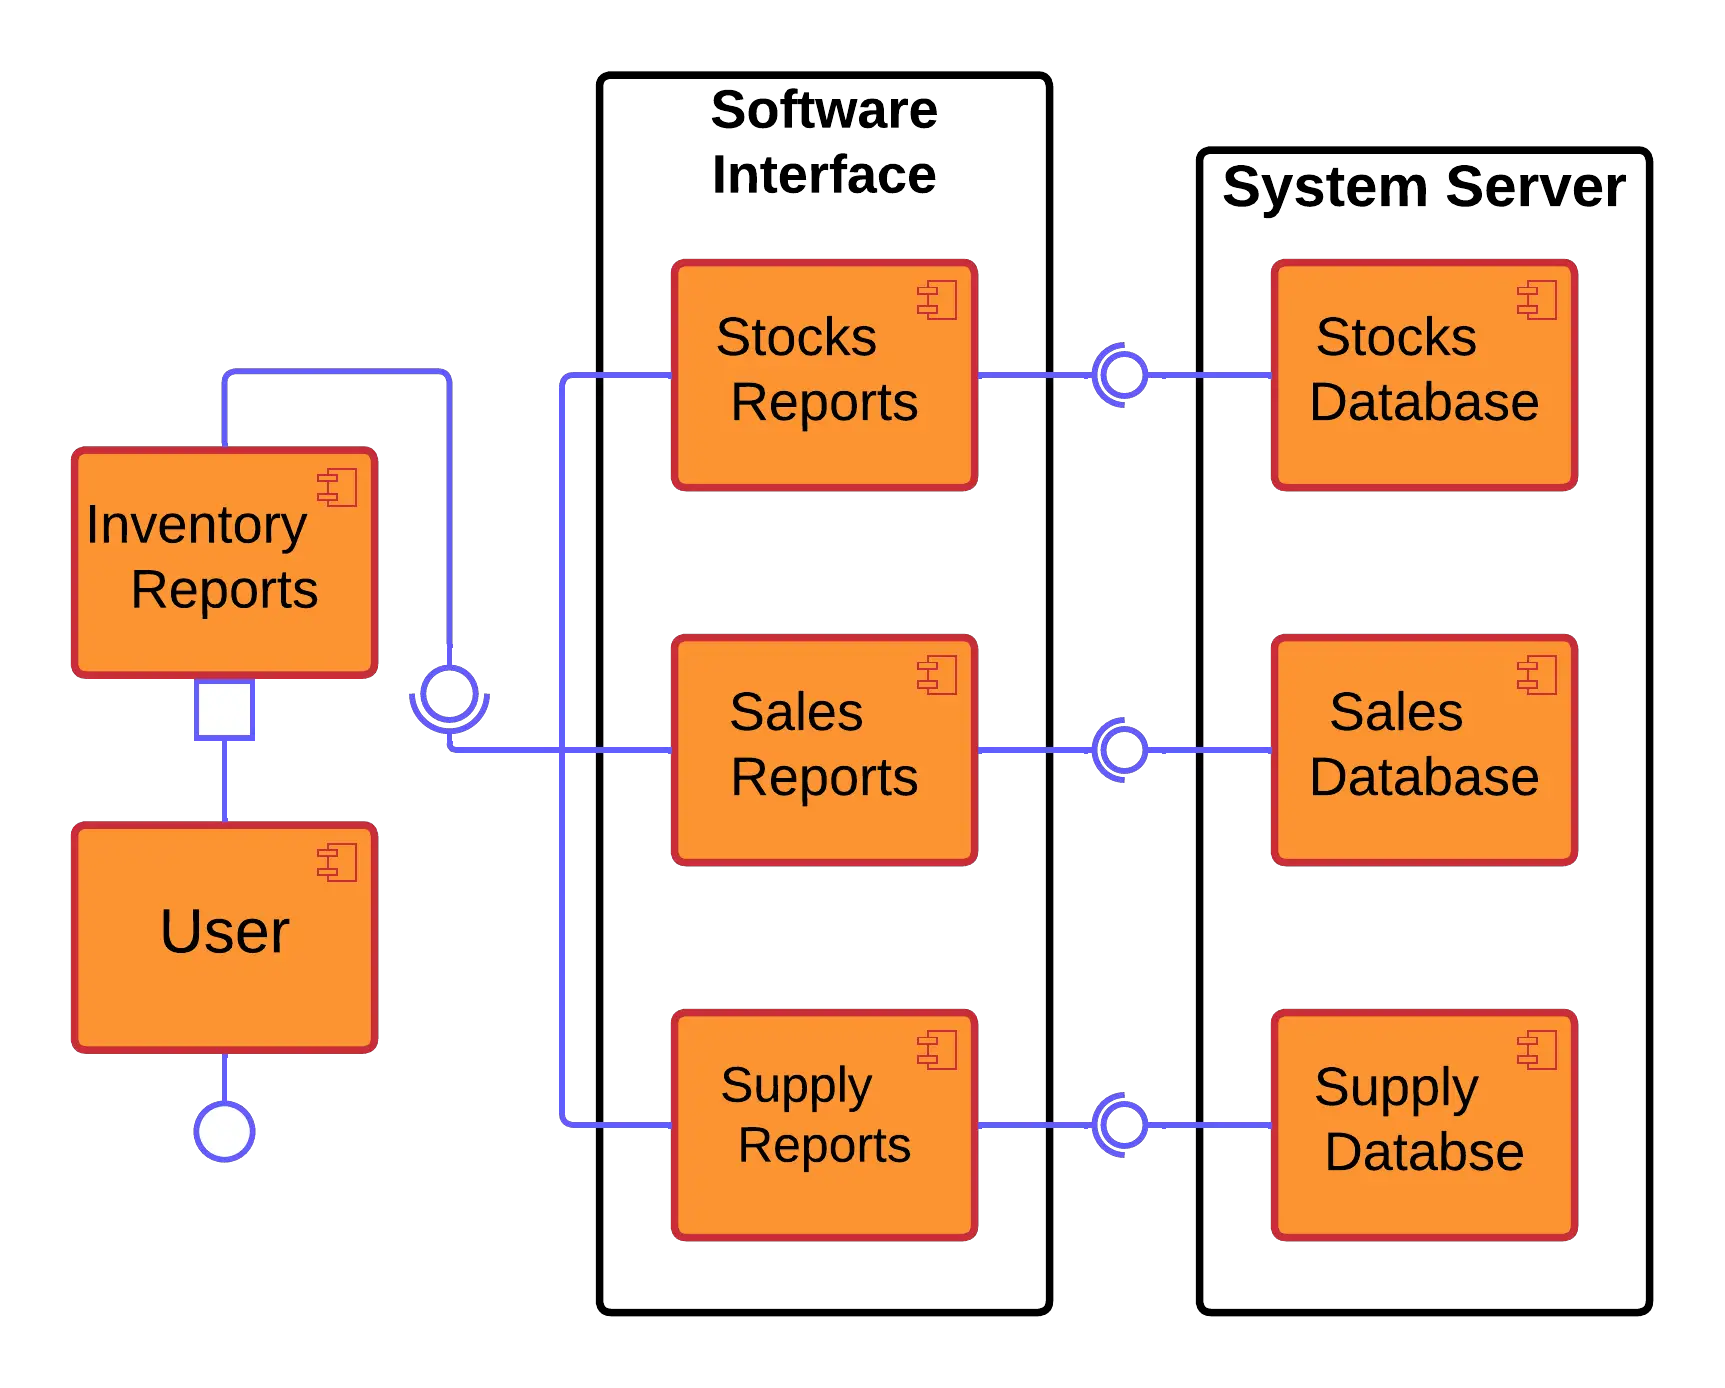 Component Diagram for Inventory Management System - Dependencies